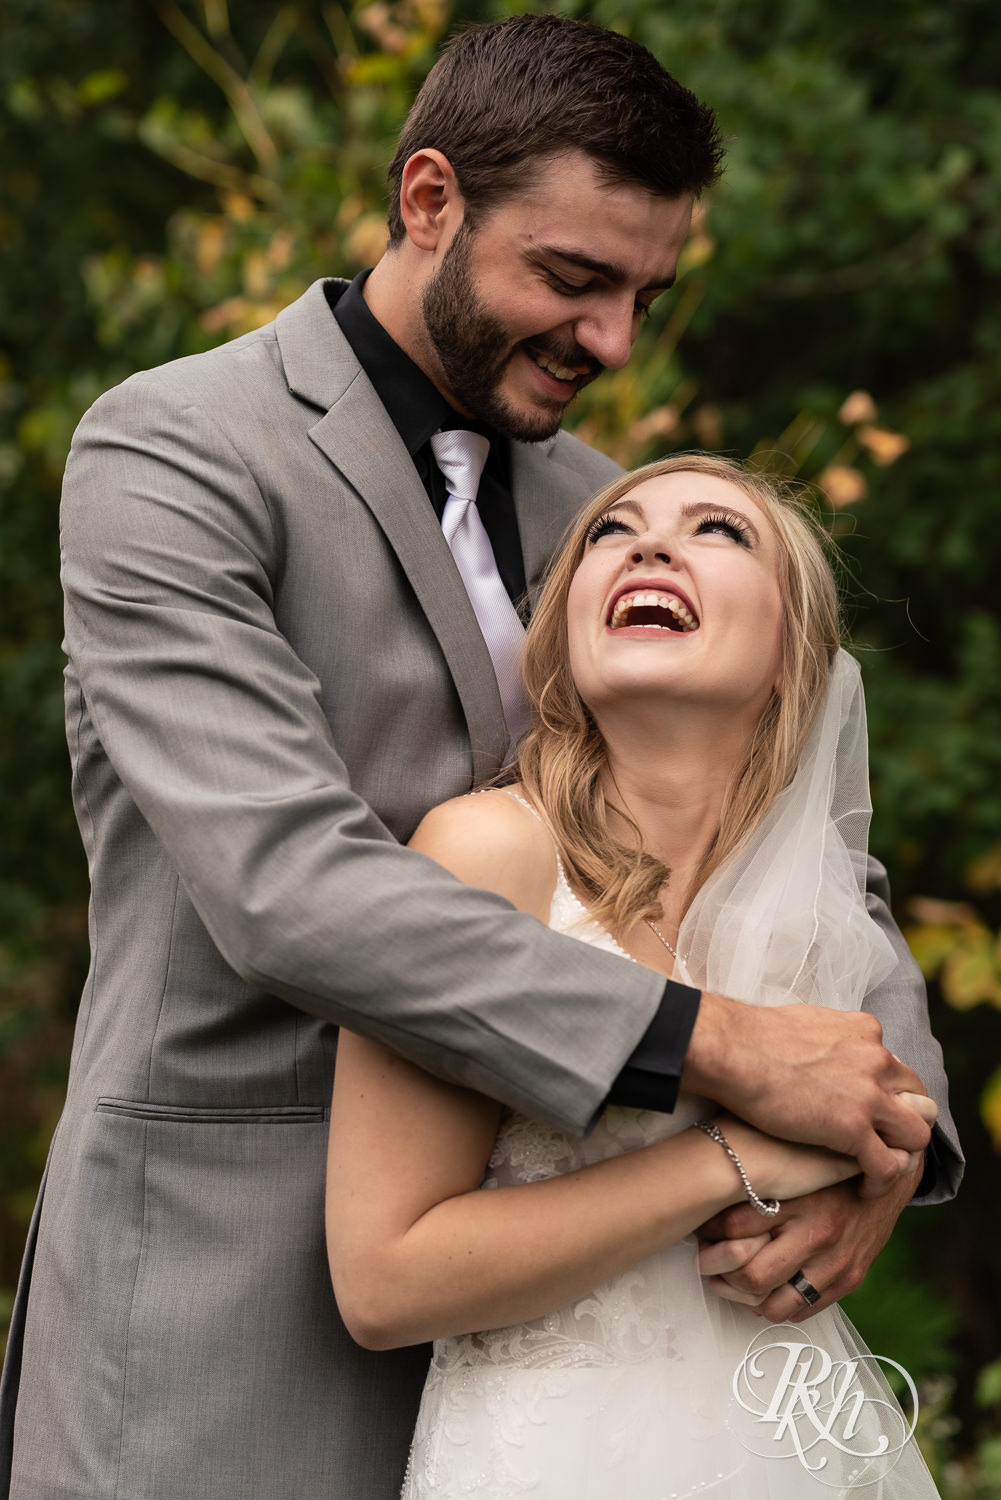 Bride and groom laugh on wedding day at Bunker Hills Event Center in Coon Rapids, Minnesota.